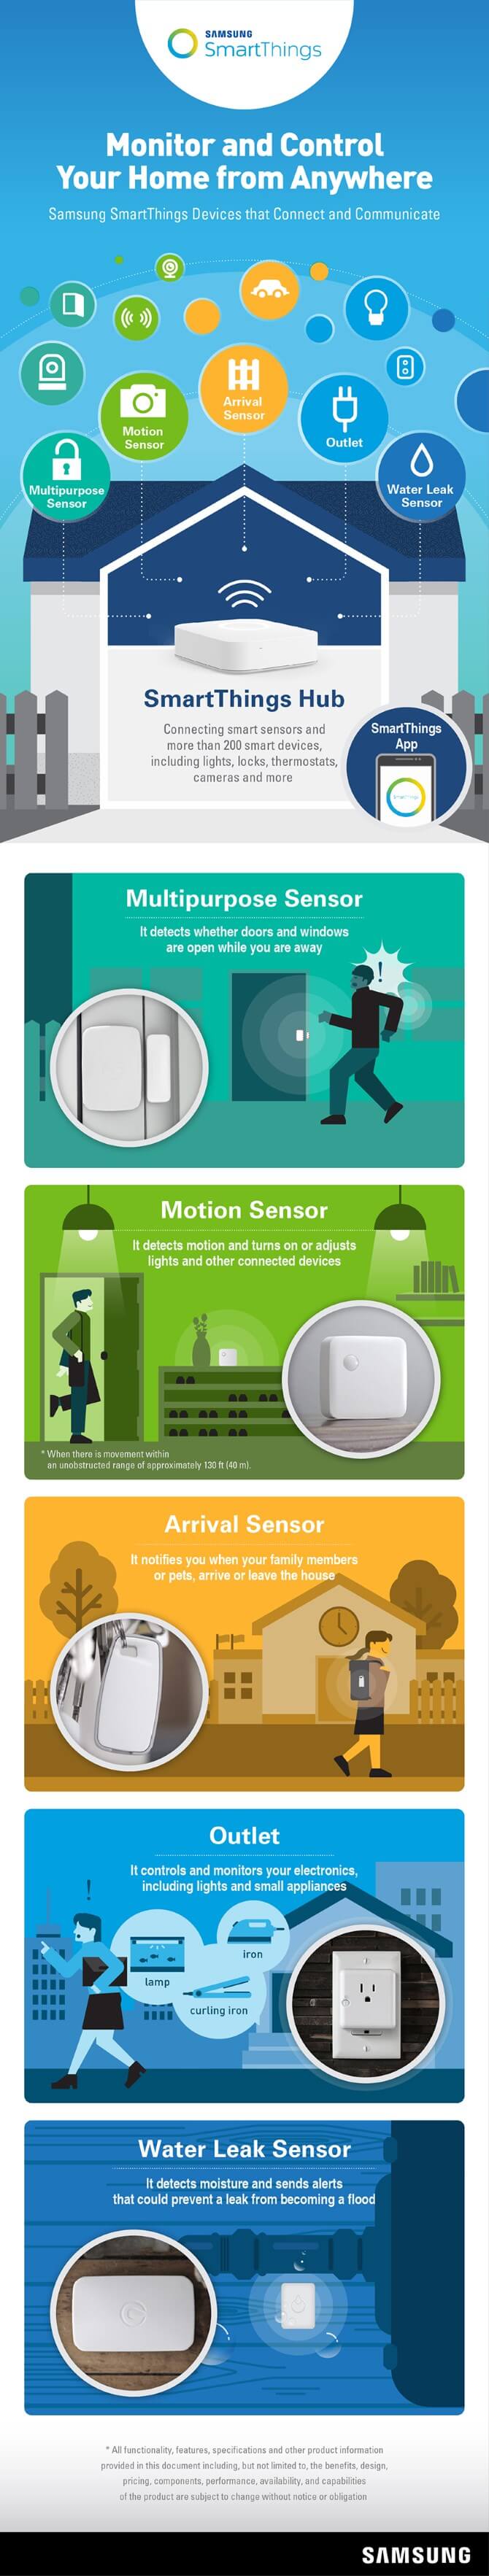 Control Your Home from Anywhere with Samsung’s SmartThings [Infographic]